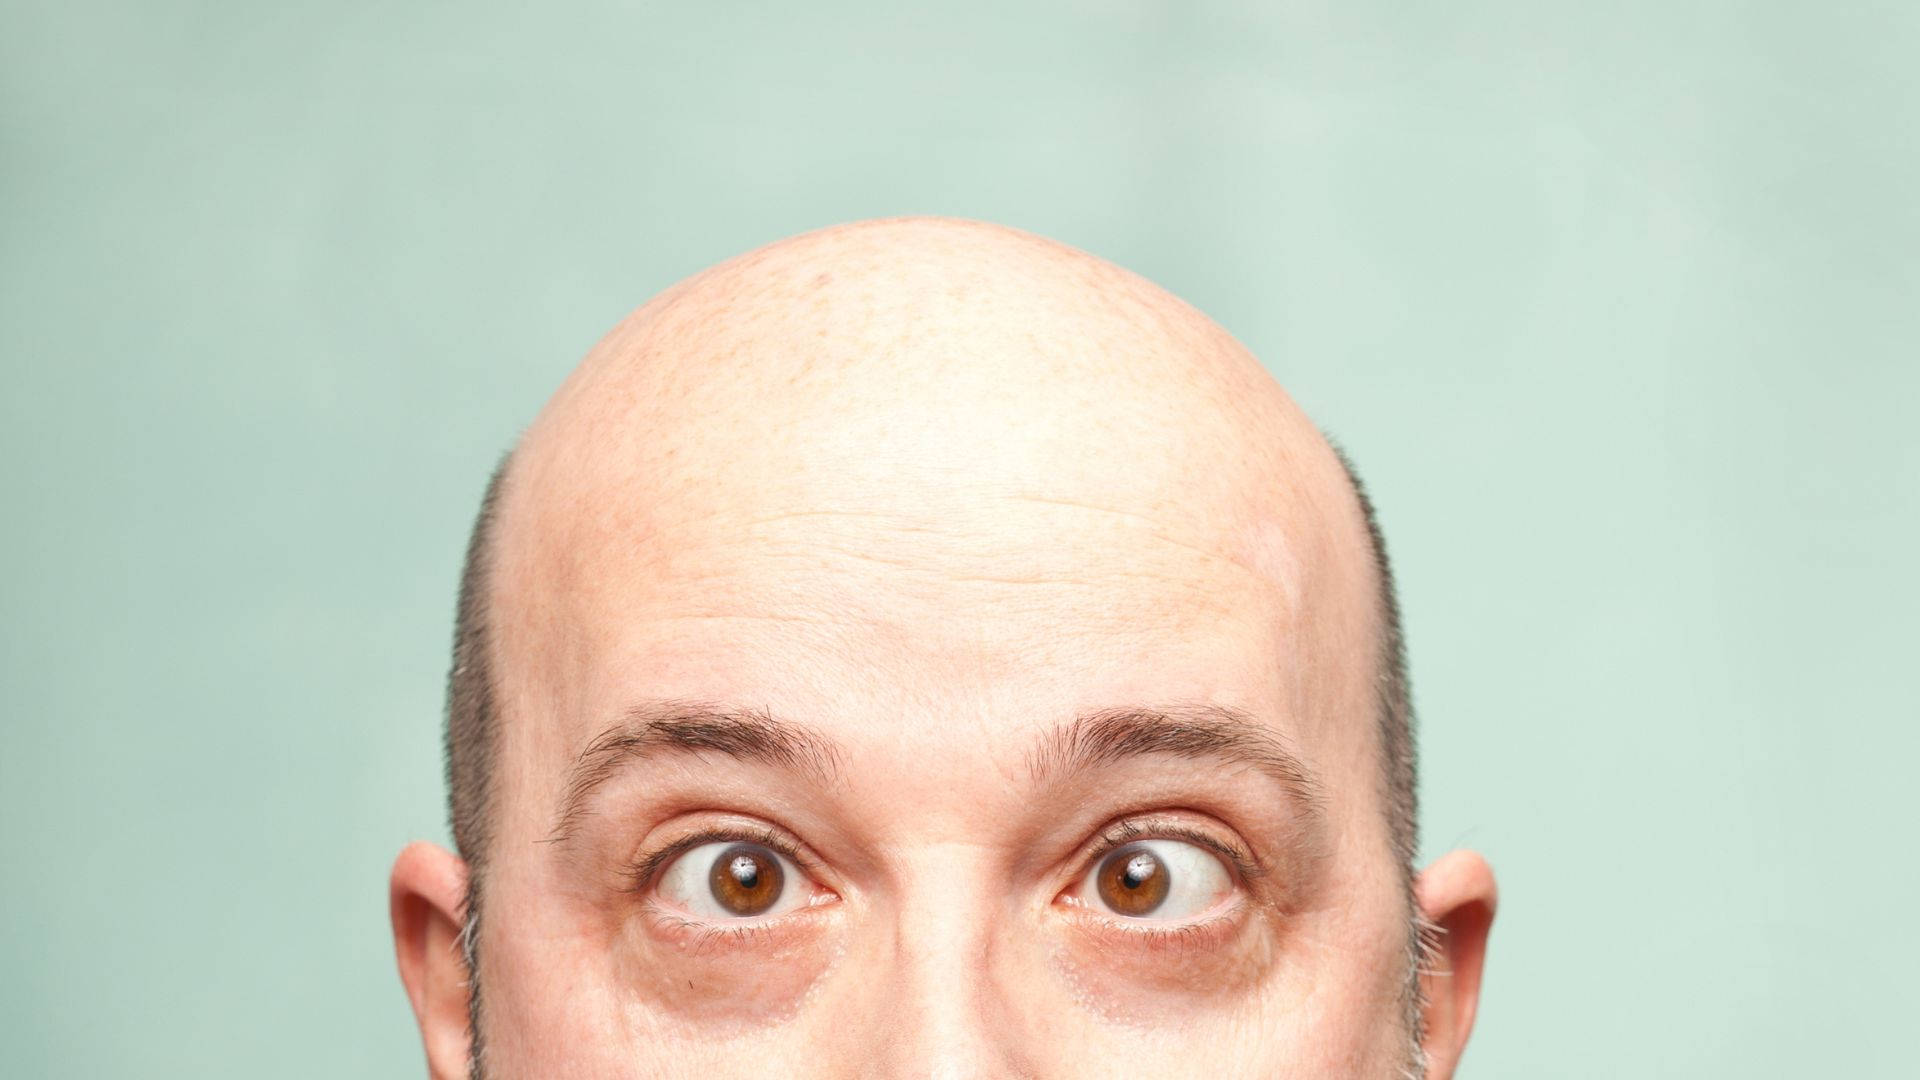 Bald Man With Crossed Eyes Picture